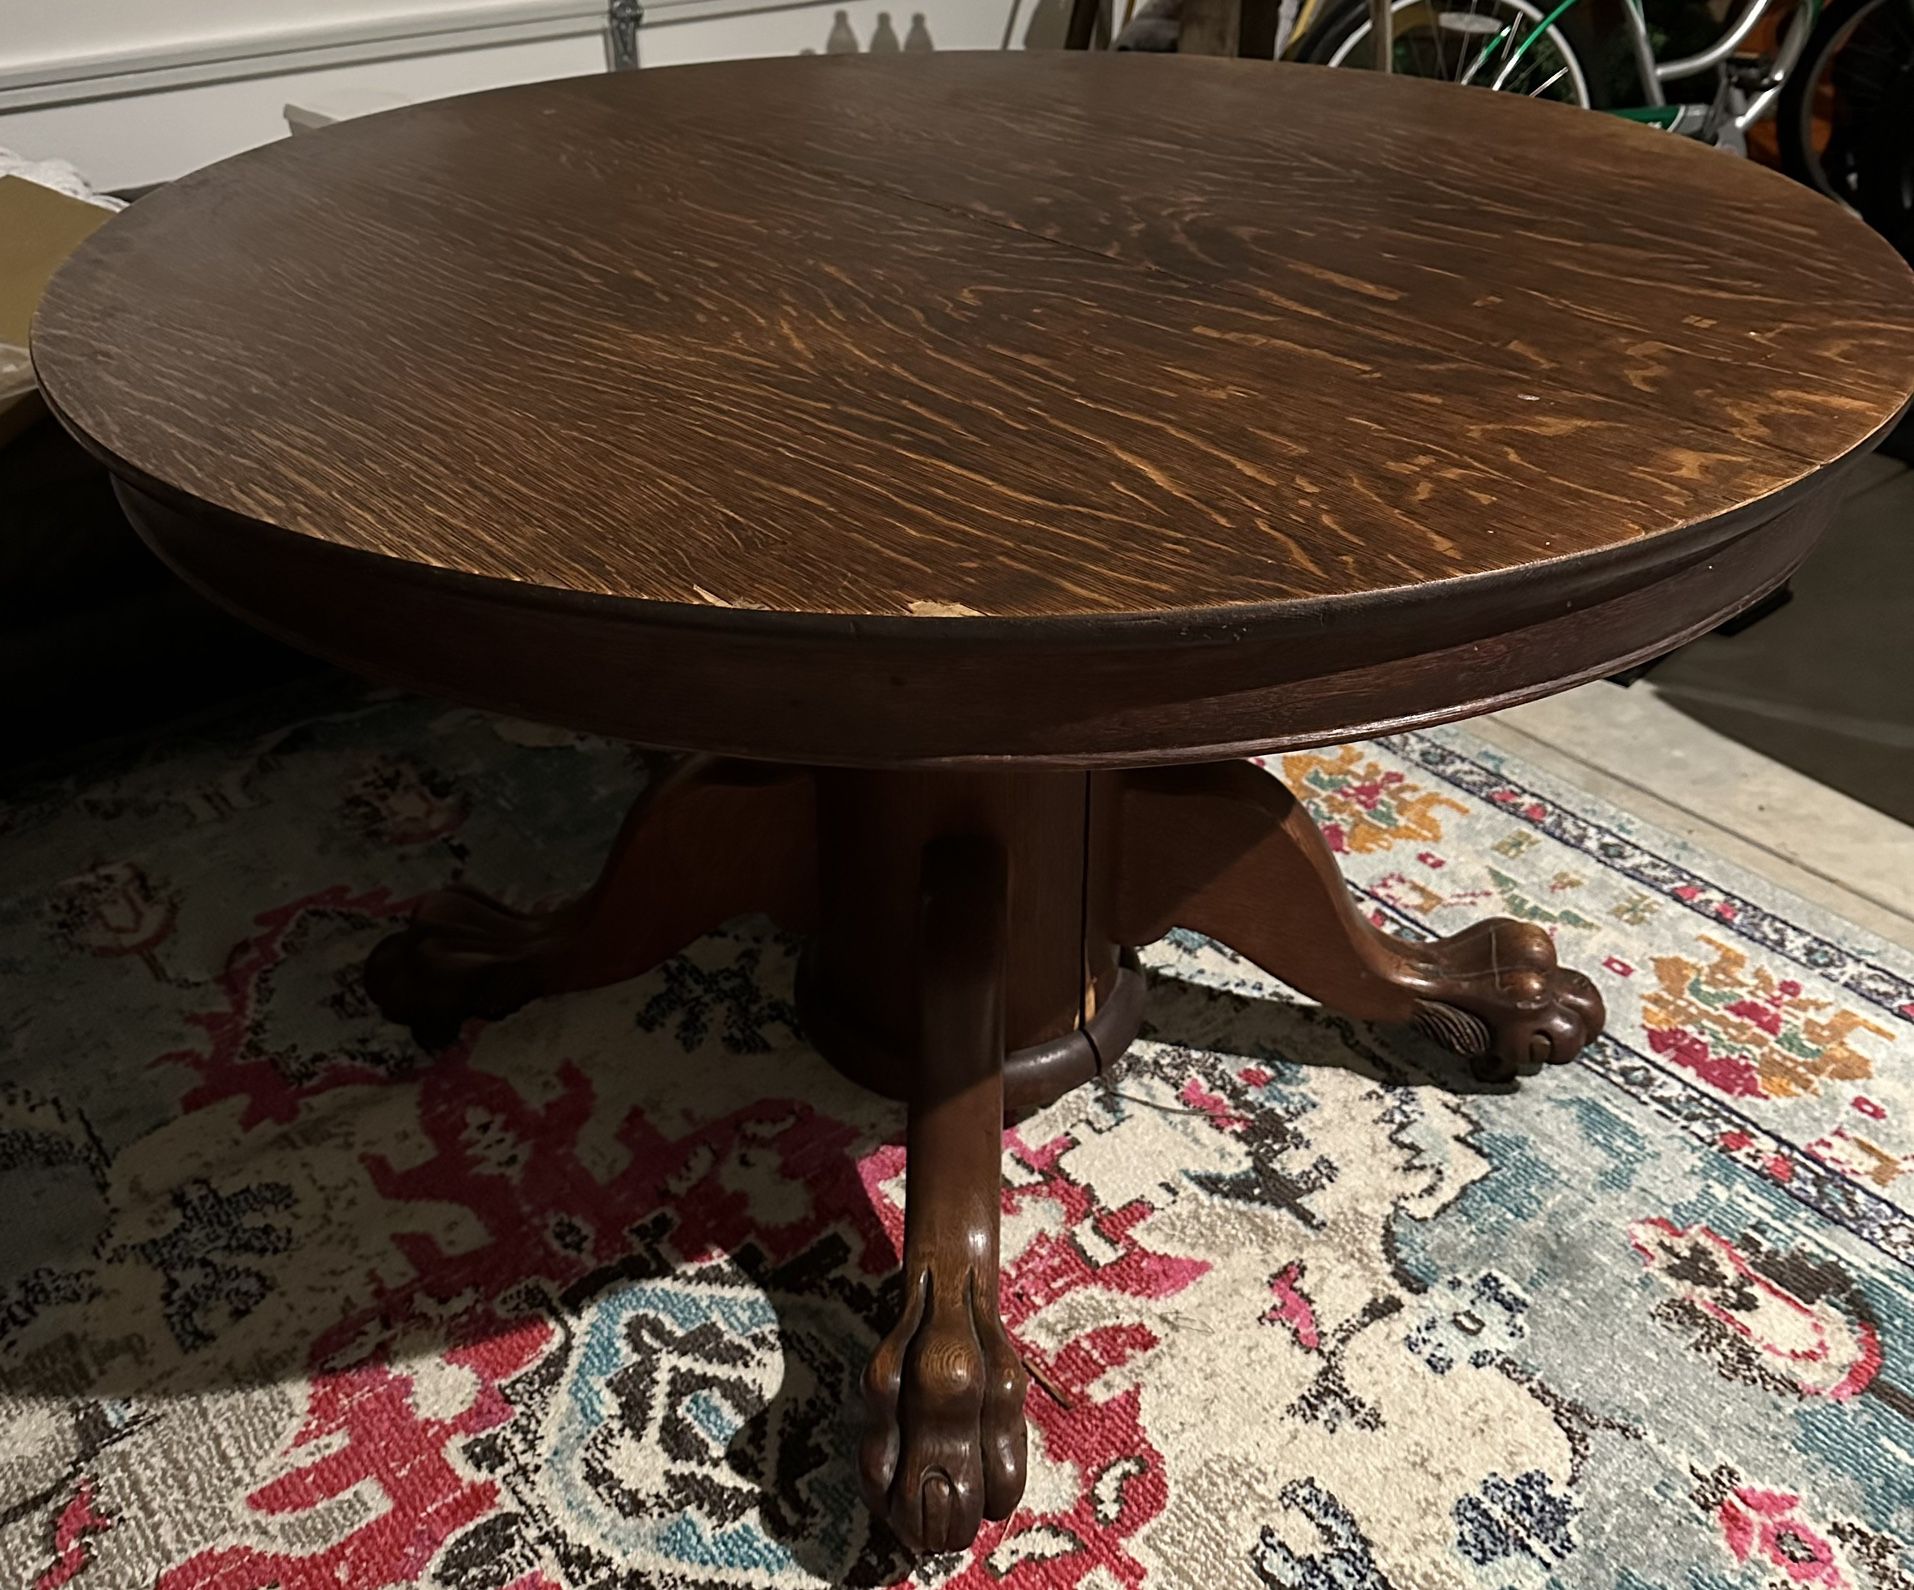 Antique Circular Wooden Table With Claw Feet